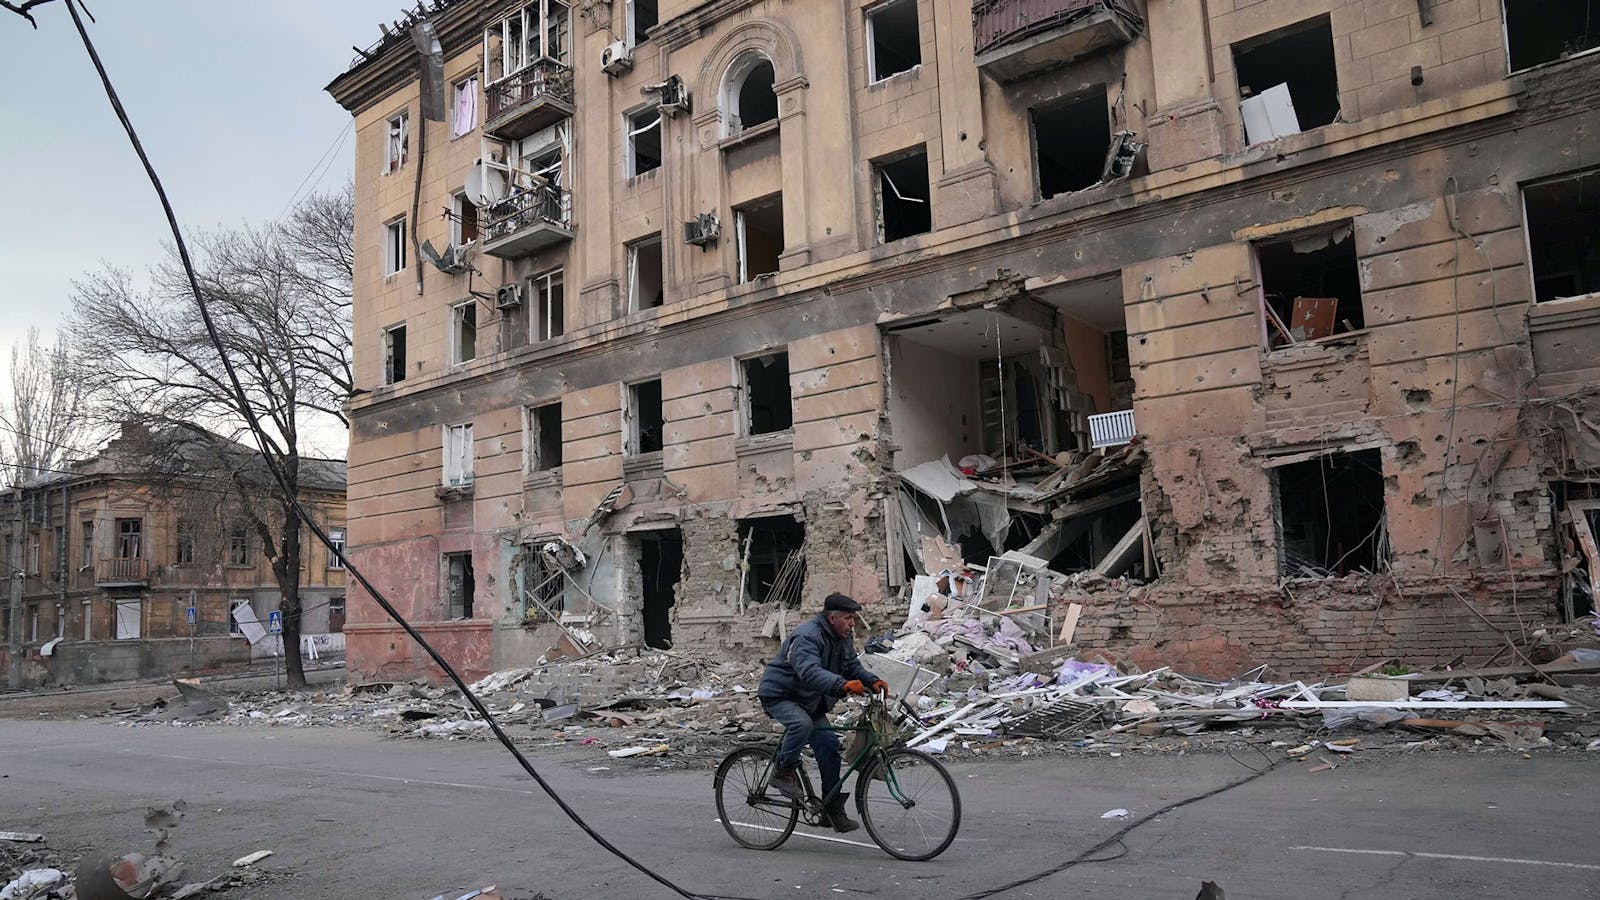 A man rides a bicycle in front of an apartment building that was damaged by shelling in Mariupol, Ukraine. Photo by AP.